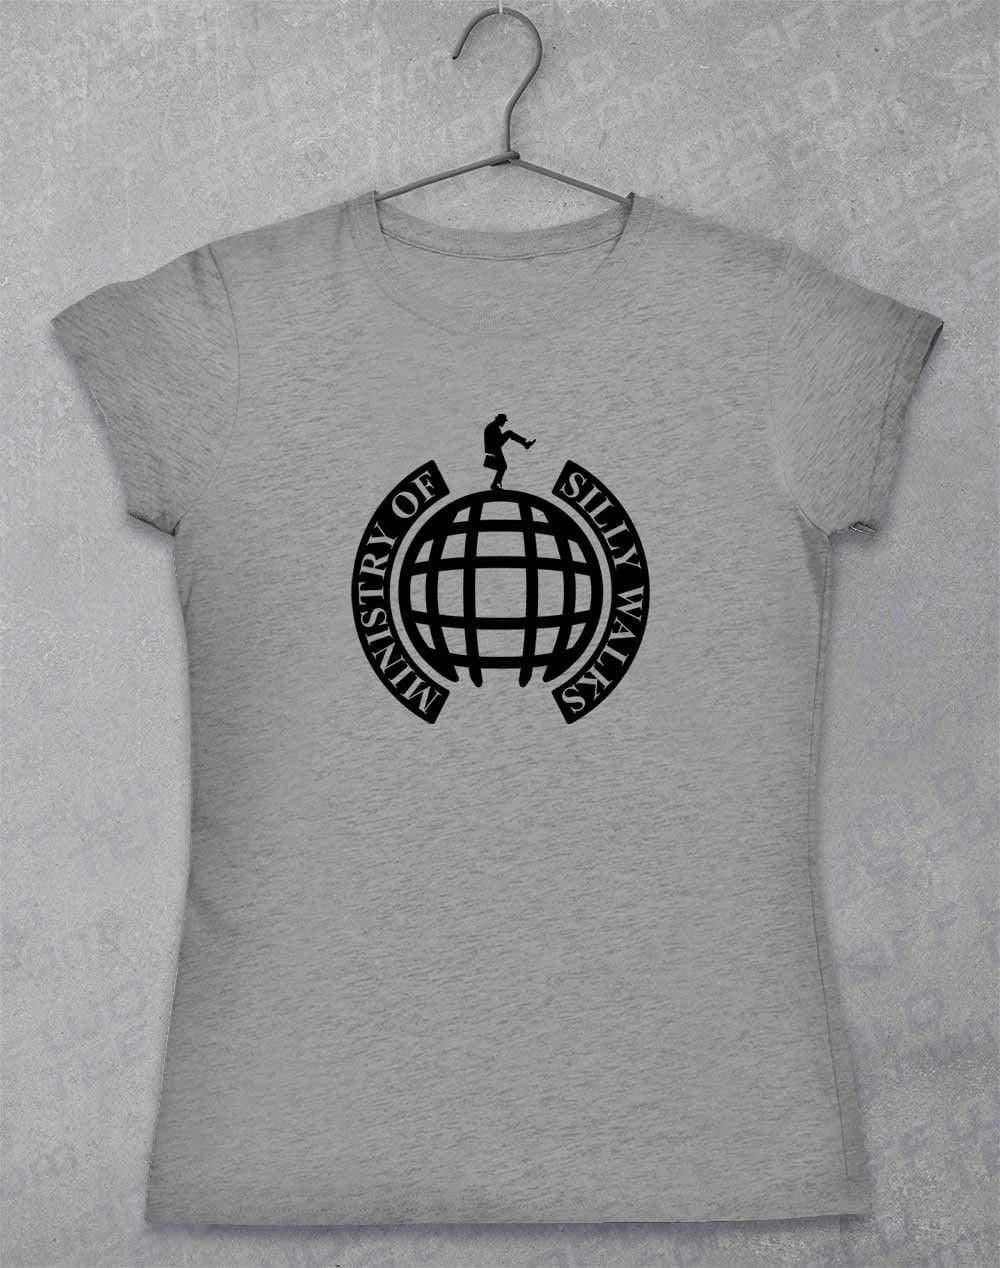 Ministry of Silly Walks Womens T-Shirt 8-10 / Sport Grey  - Off World Tees